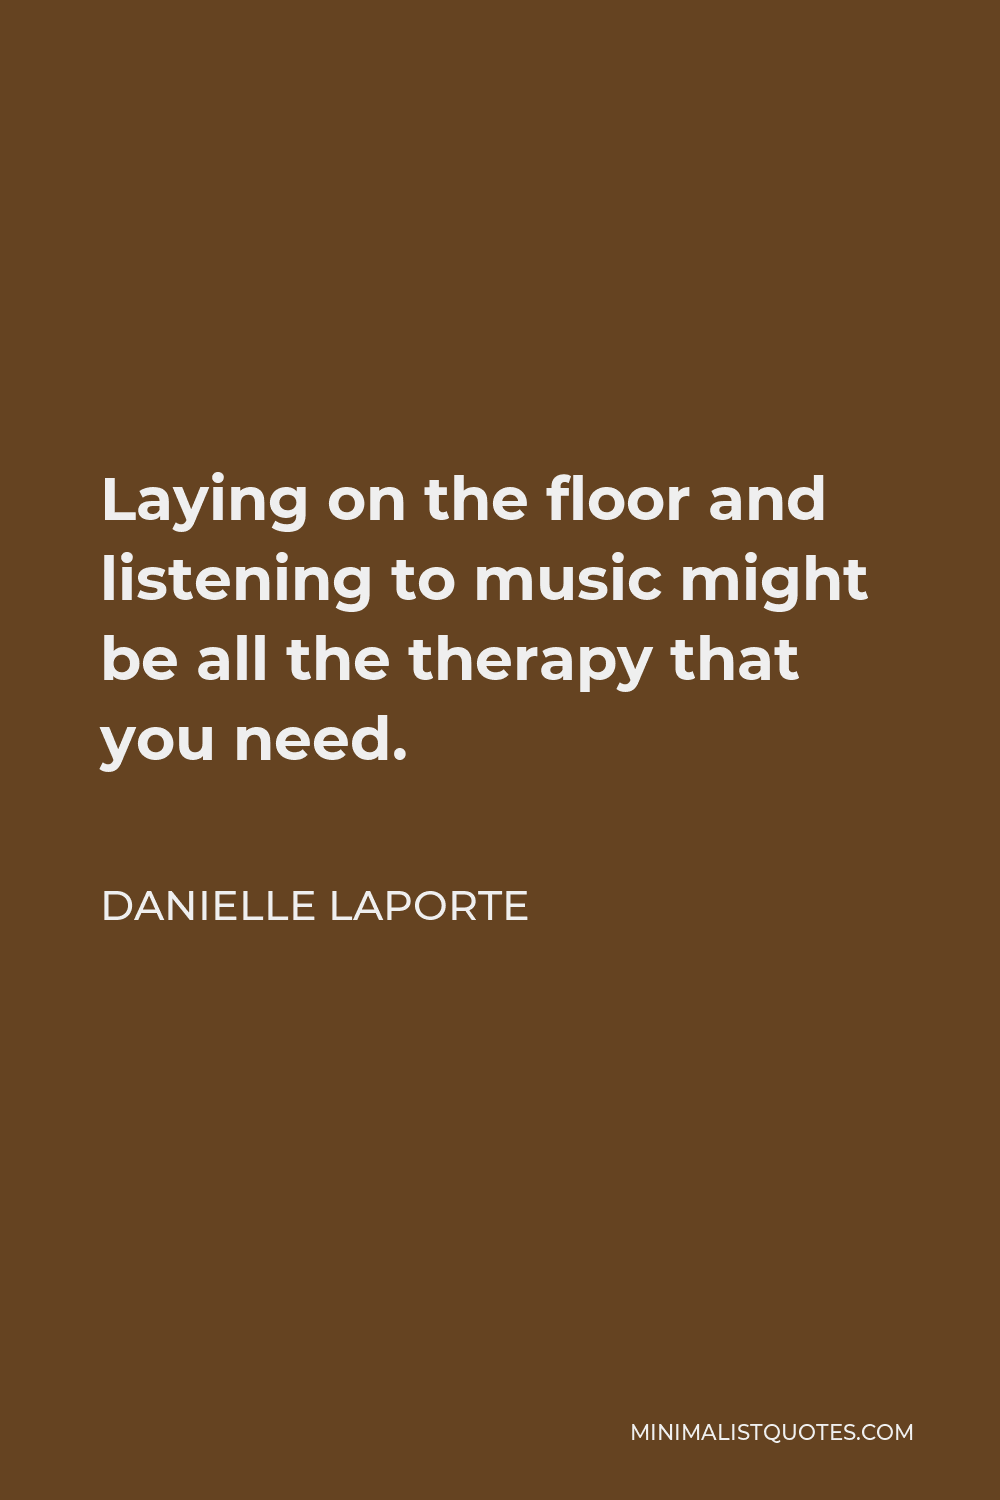 Danielle LaPorte Quote - Laying on the floor and listening to music might be all the therapy that you need.